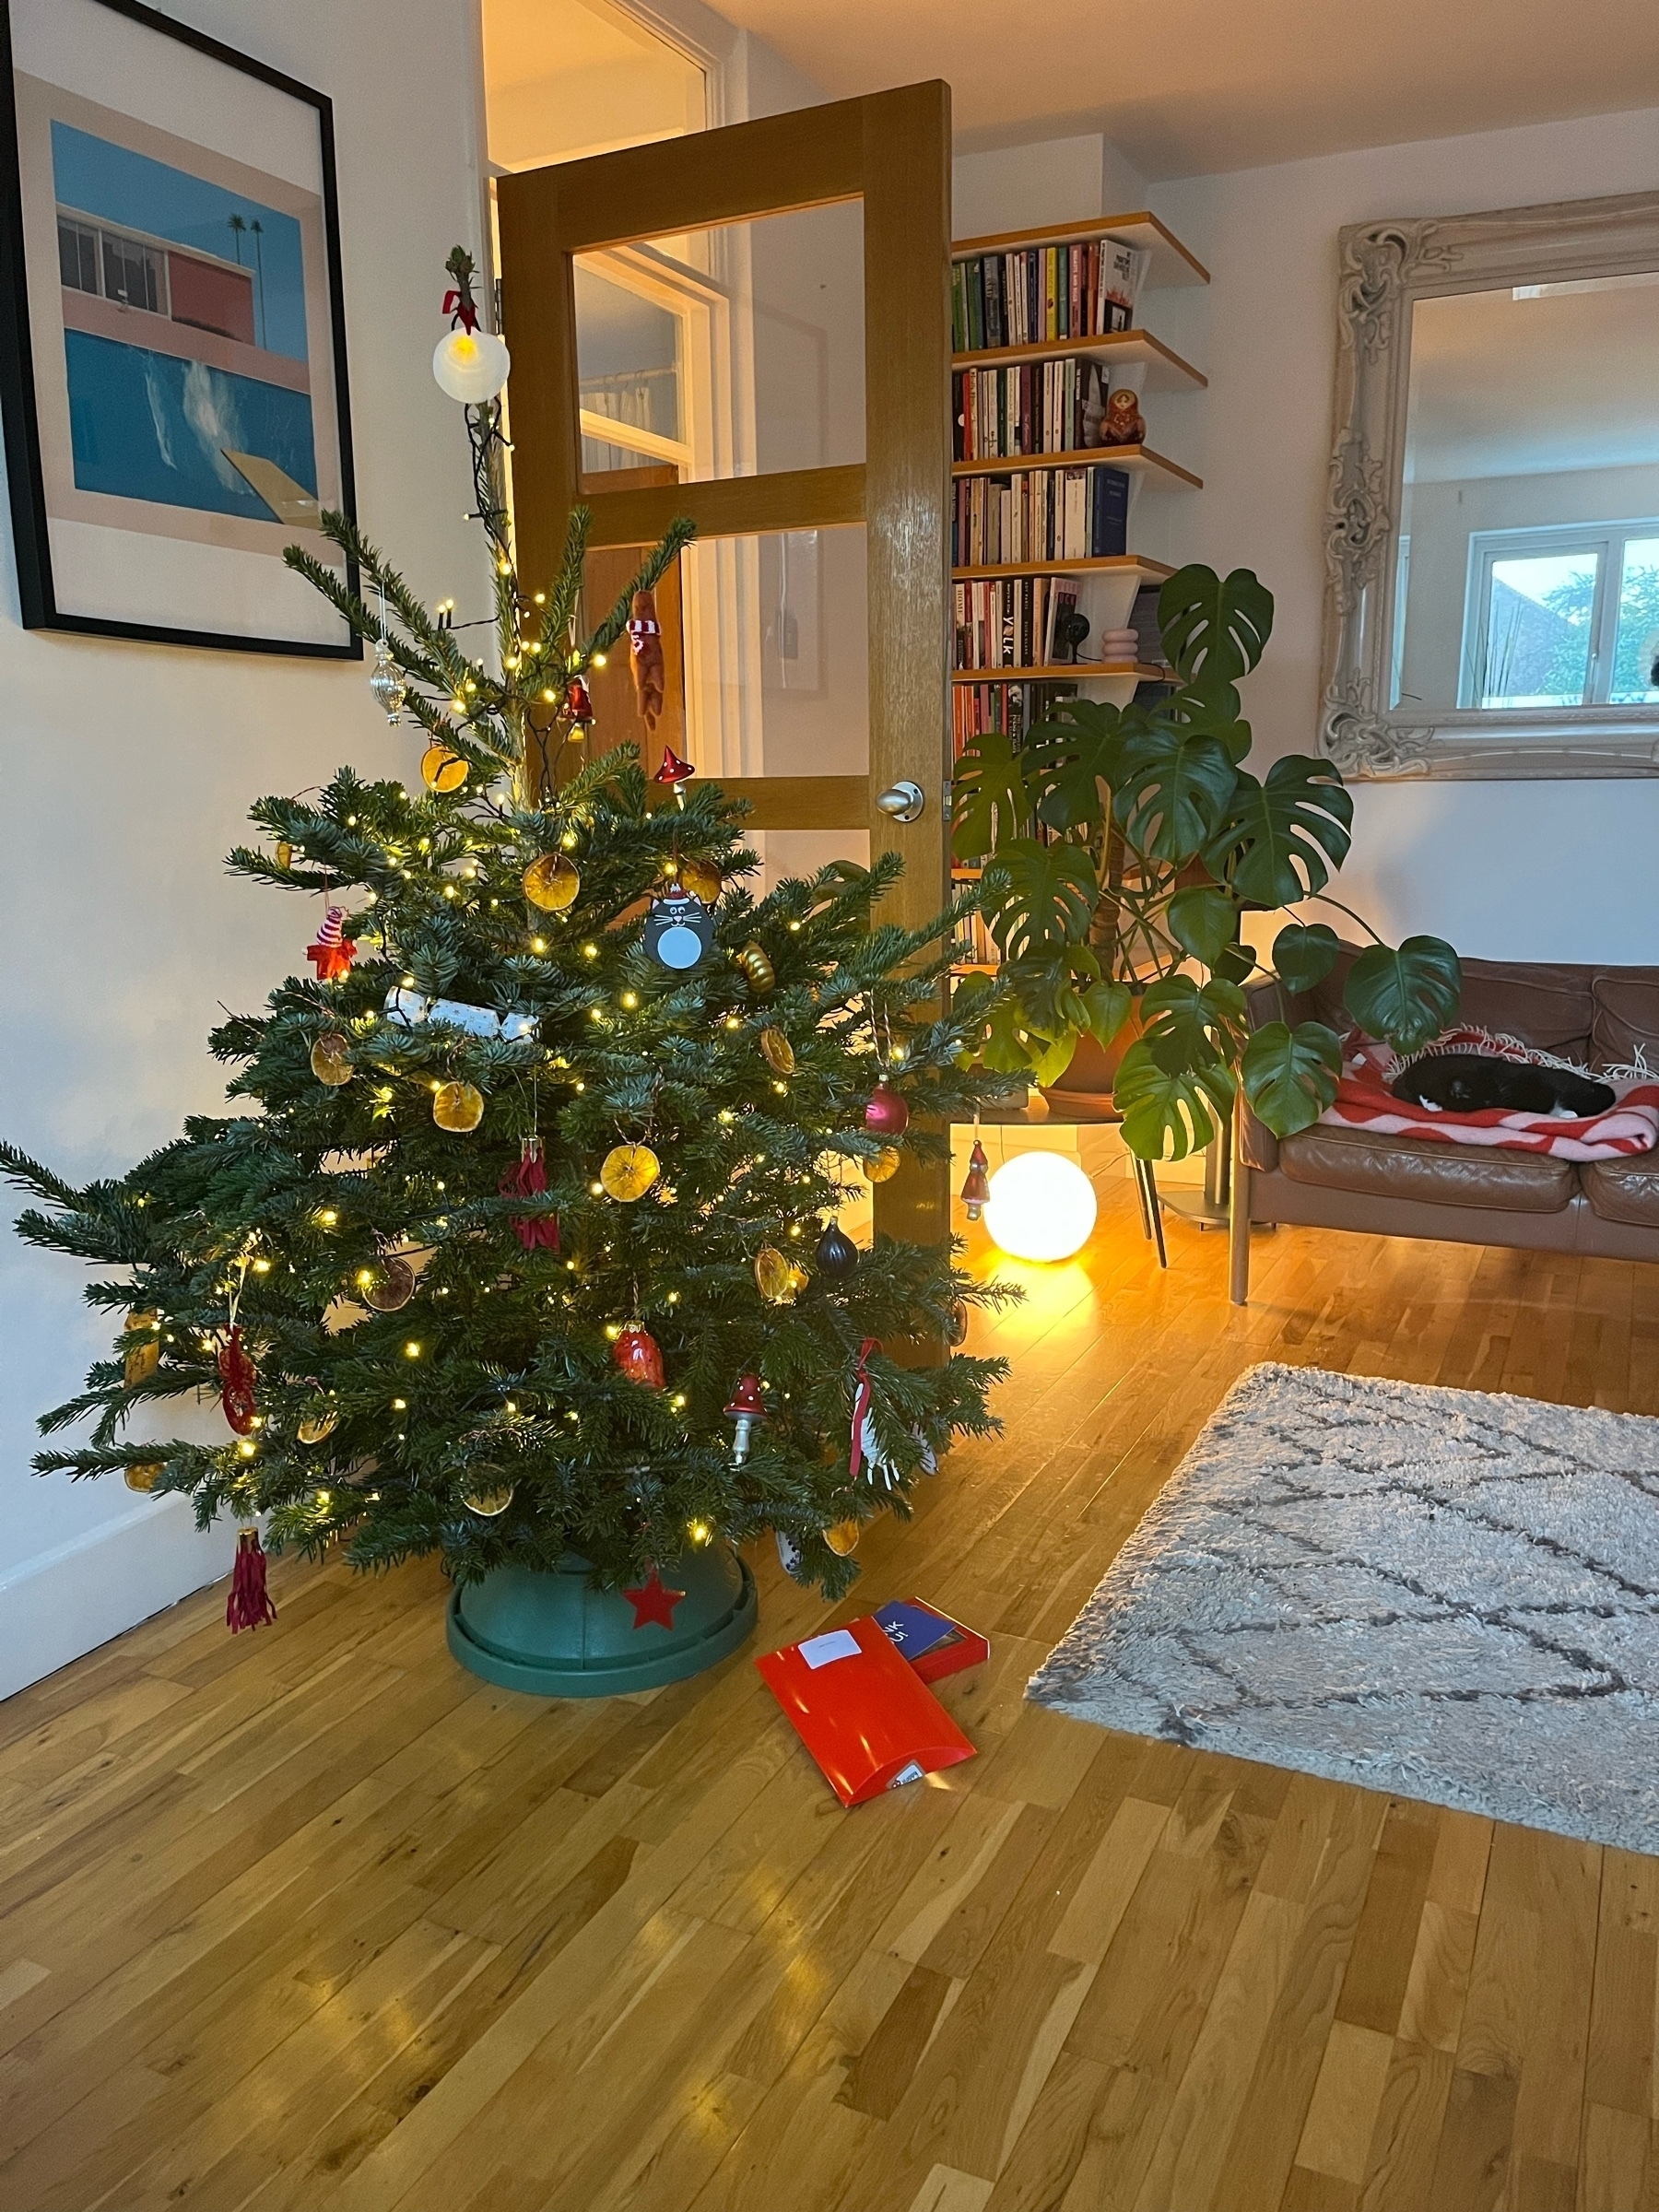 Christmas tree with decorations on such as dried oranges, cat background on brown leather sofa